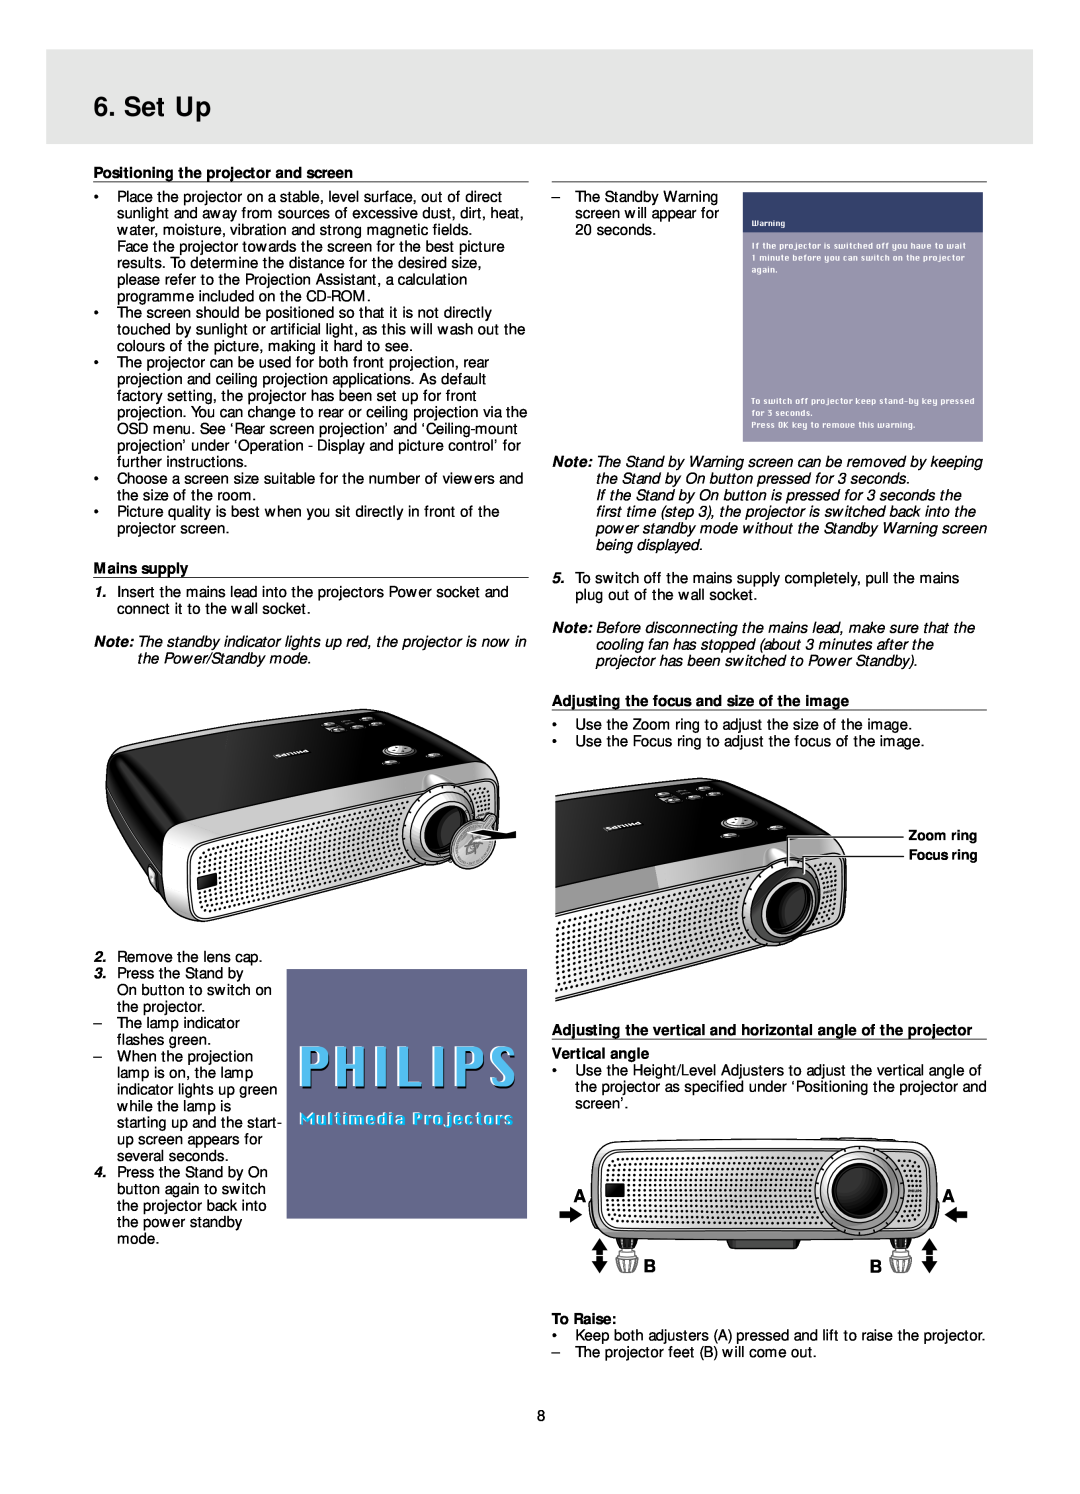 Philips LC4341 Set Up, Philips, Multimedia Projectors, Positioning the projector and screen, Mains supply, Vertical angle 